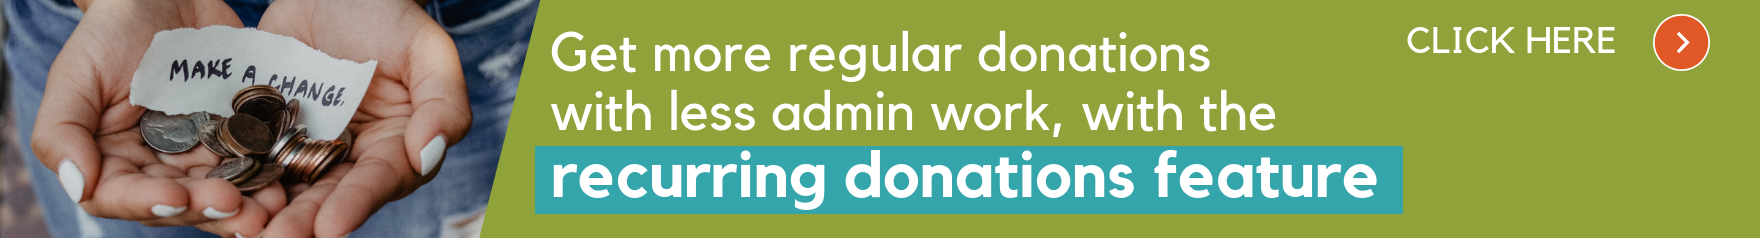 Recurring donation in post banner